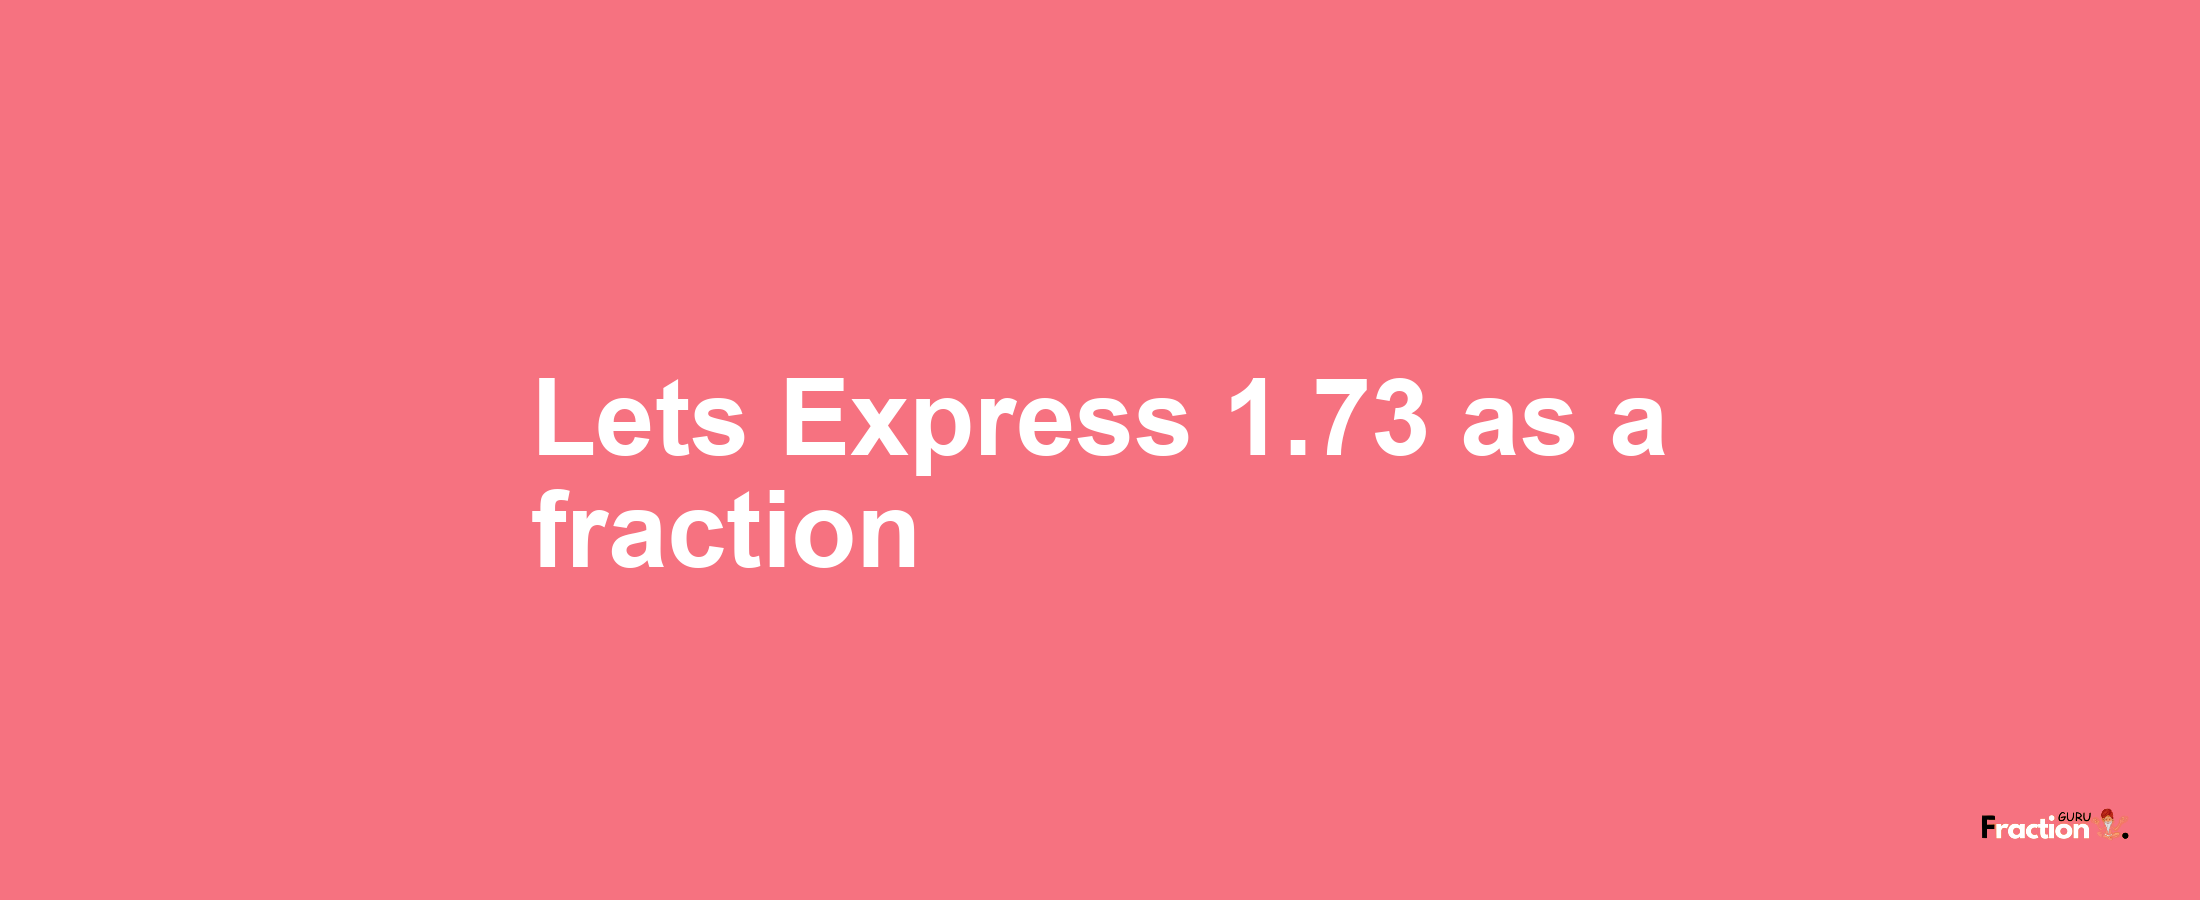 Lets Express 1.73 as afraction